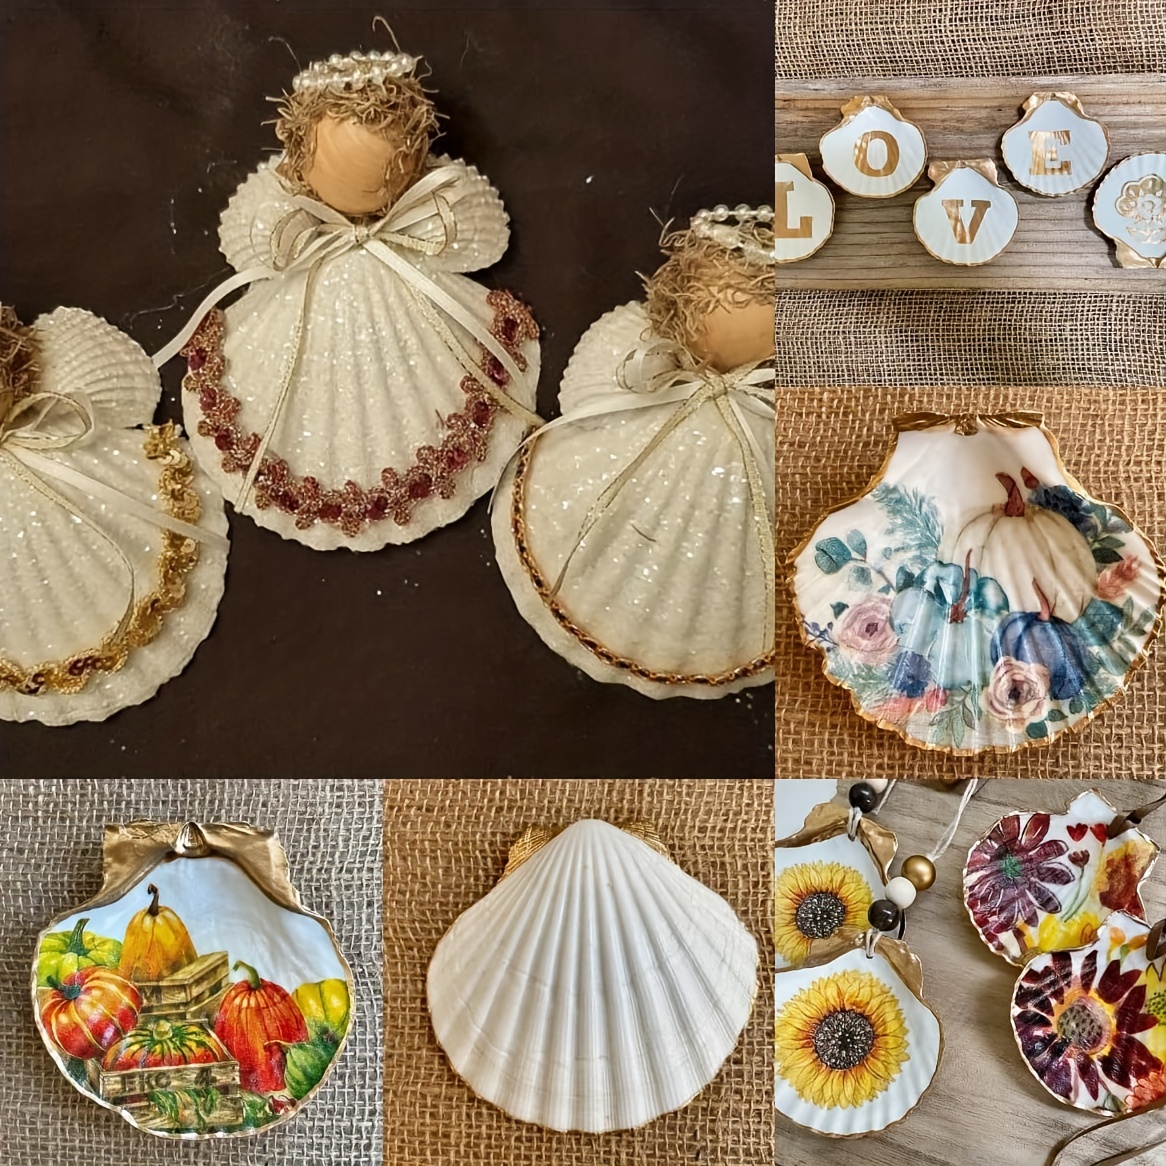 20pcs Natural Scallop Shells for DIY Crafts, Home Decor, and Vase Filler -  White Sea Shells from the Beach